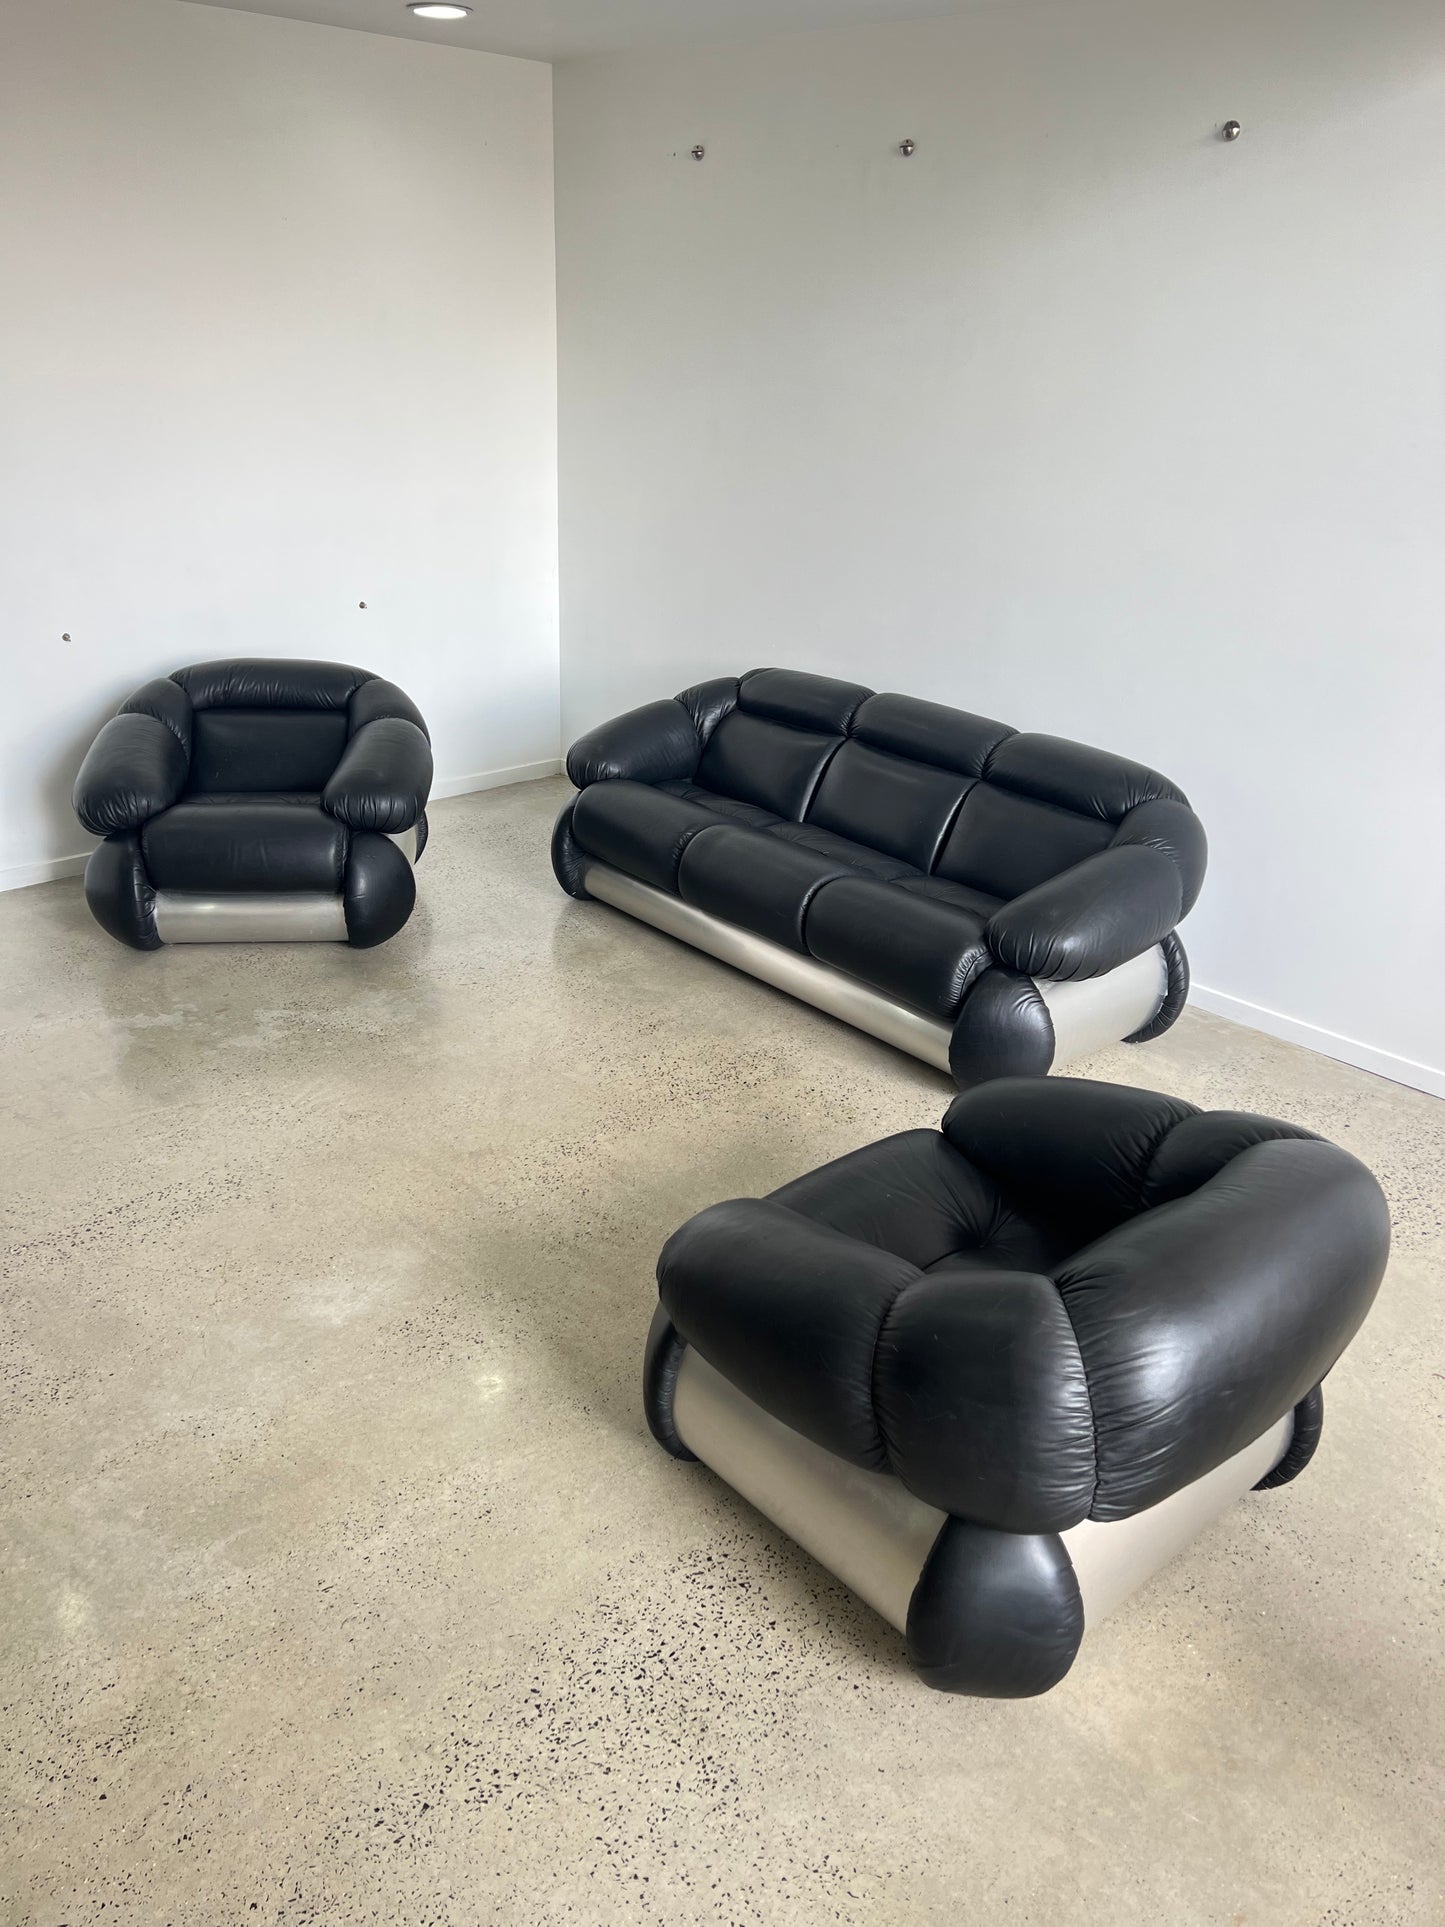 Adriano Piazzesi Black Leather Sofa Set and Armchairs, 1970s